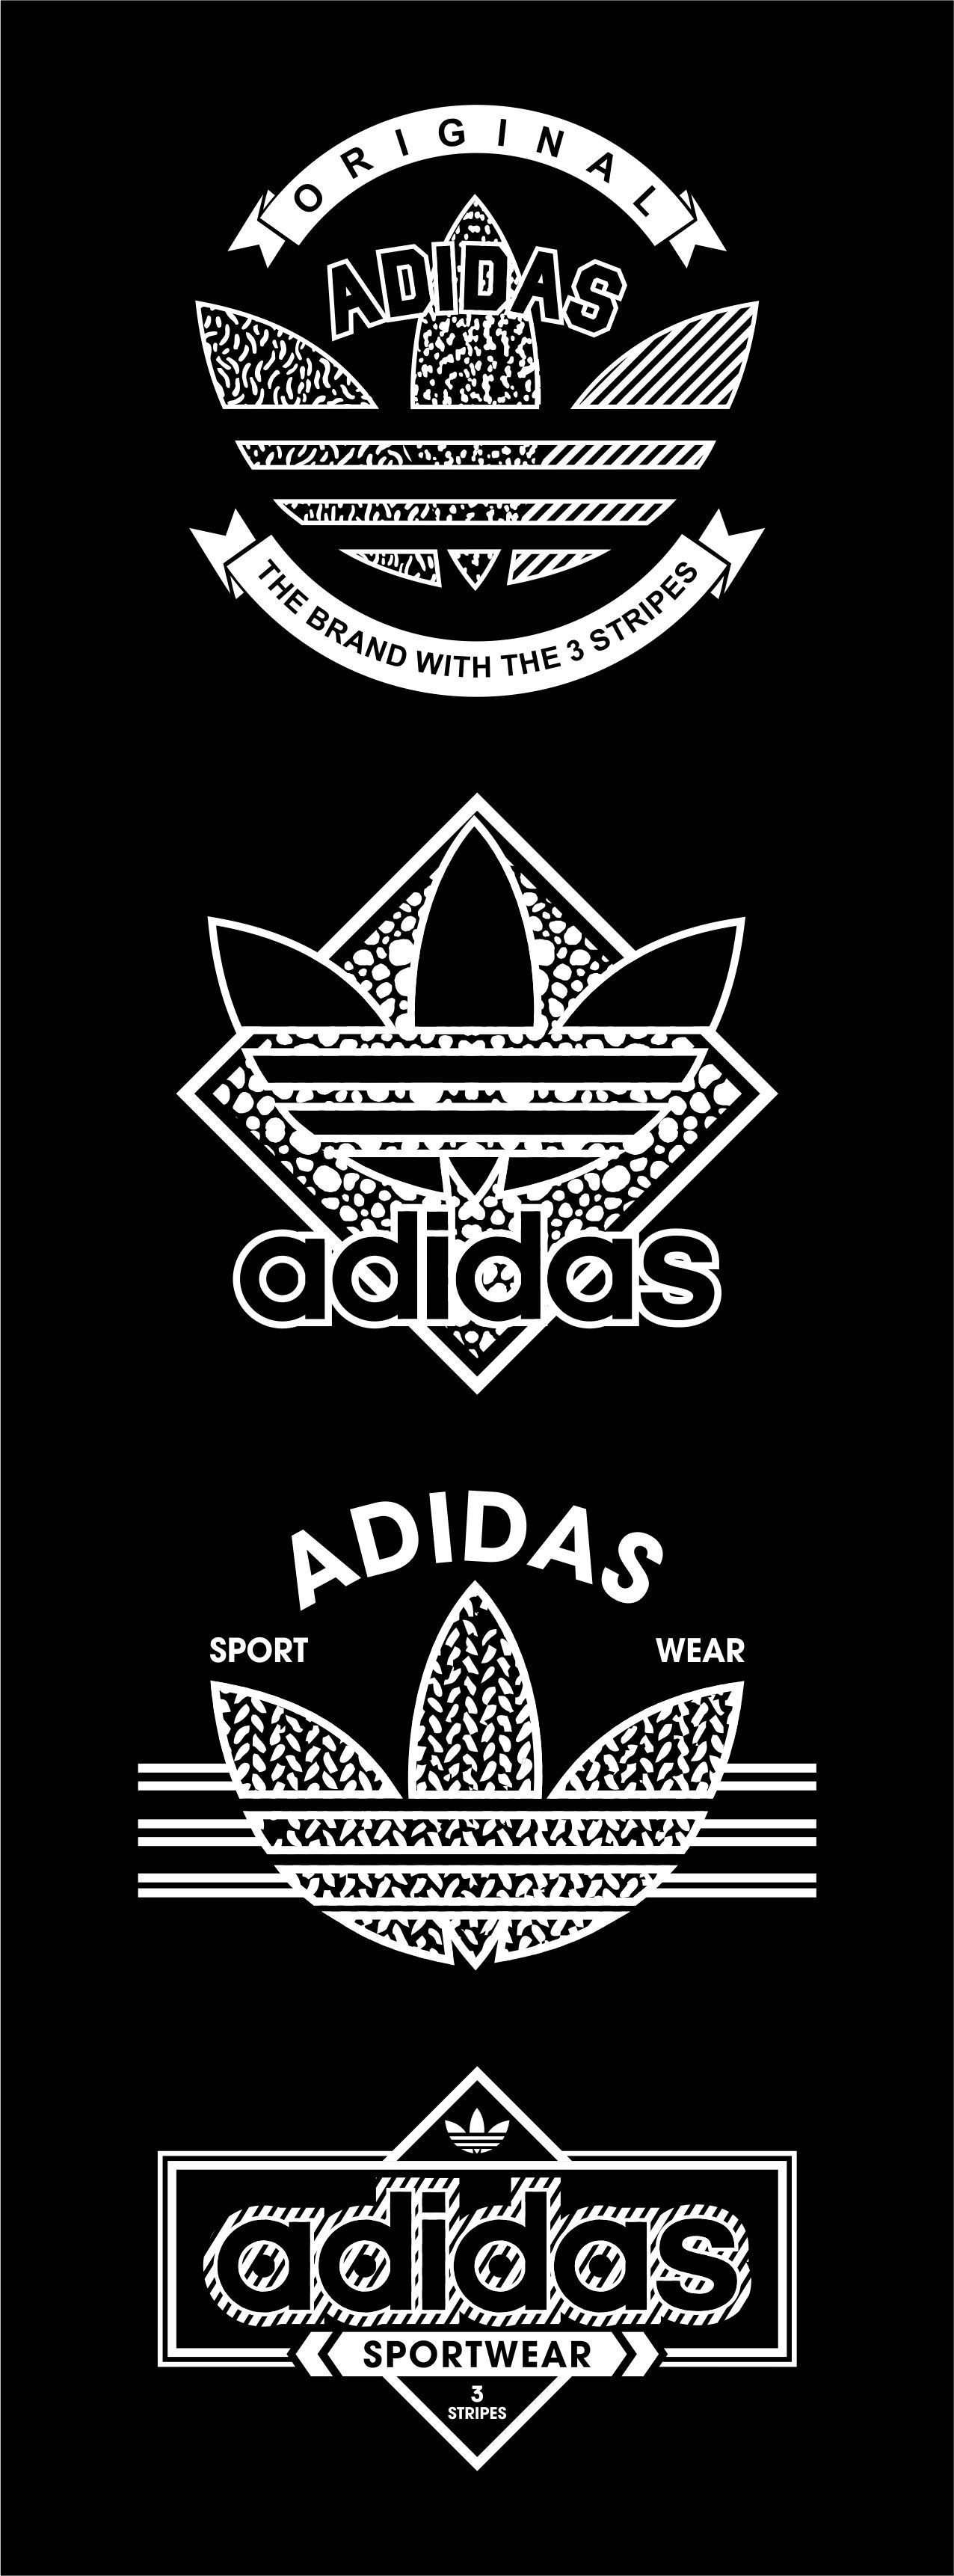 Adidas The Brand With The 3 Stripes Wallpaper Online, 54% OFF